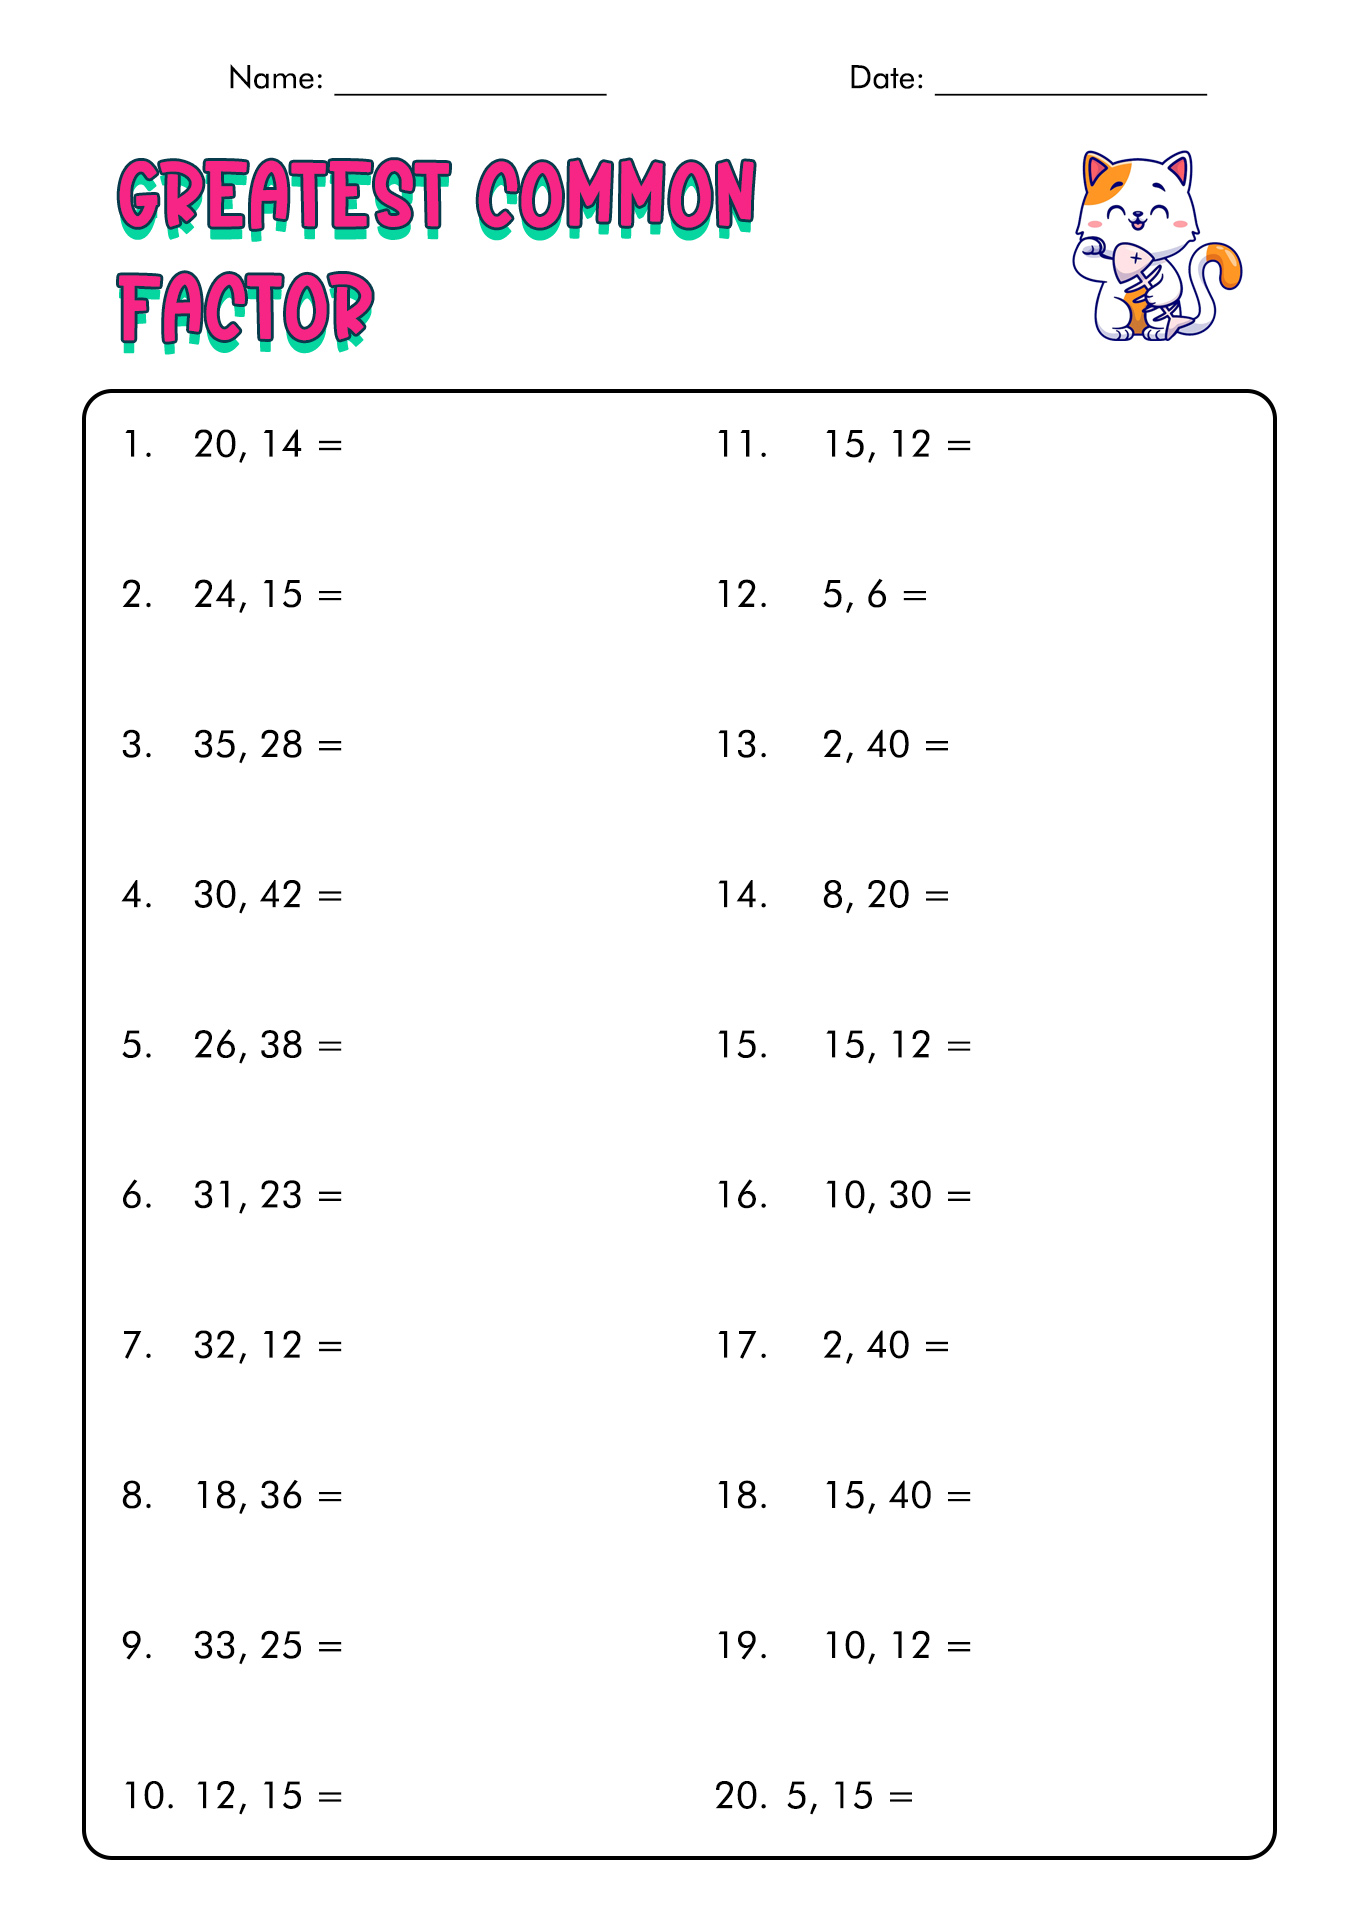 greatest-common-factor-worksheet-answers